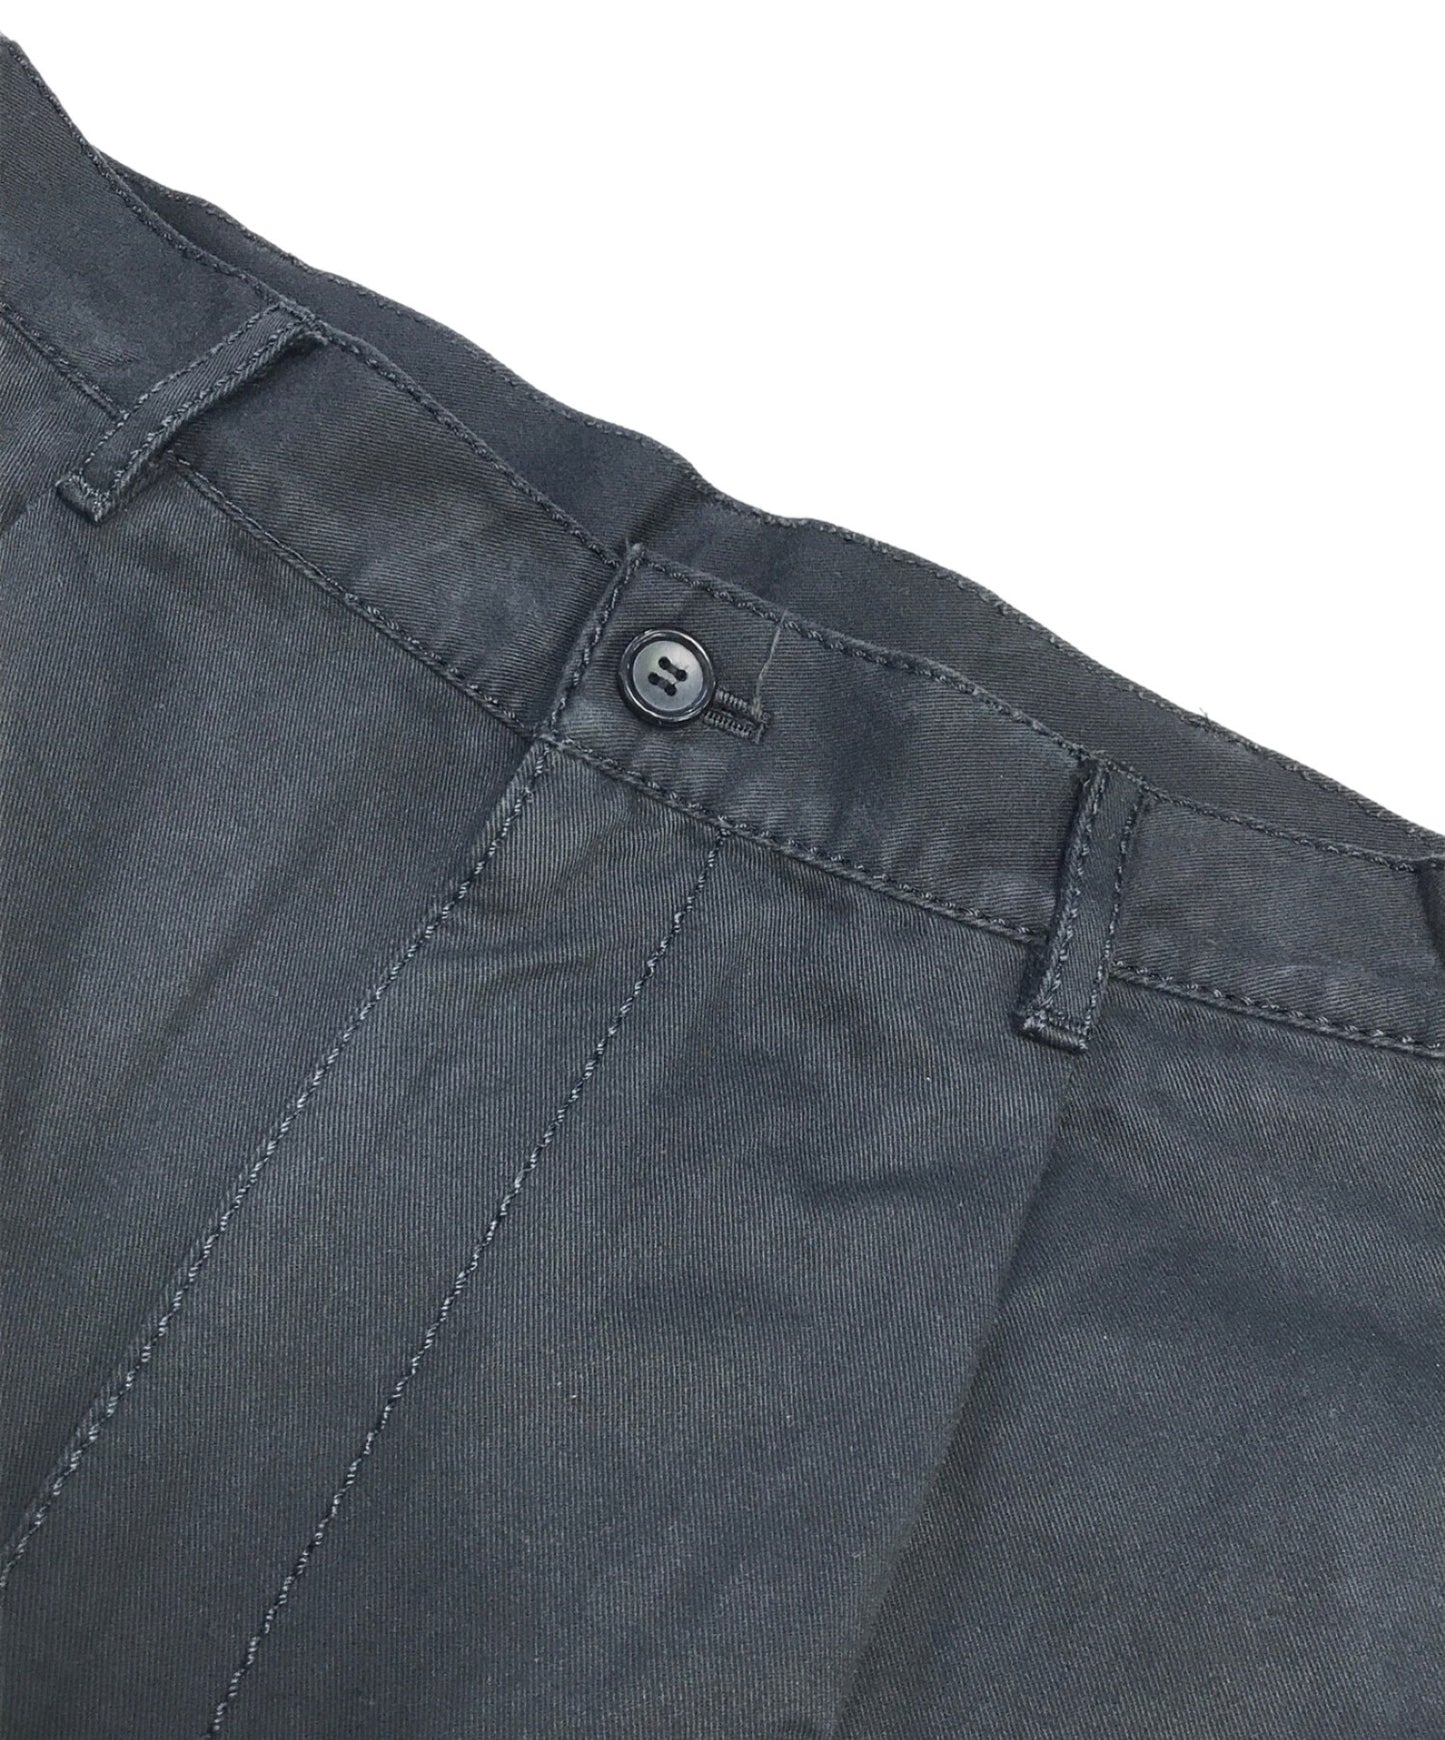 Comme des Garcons Homme Fat Stitch Tuck Chino Pants HF-P015